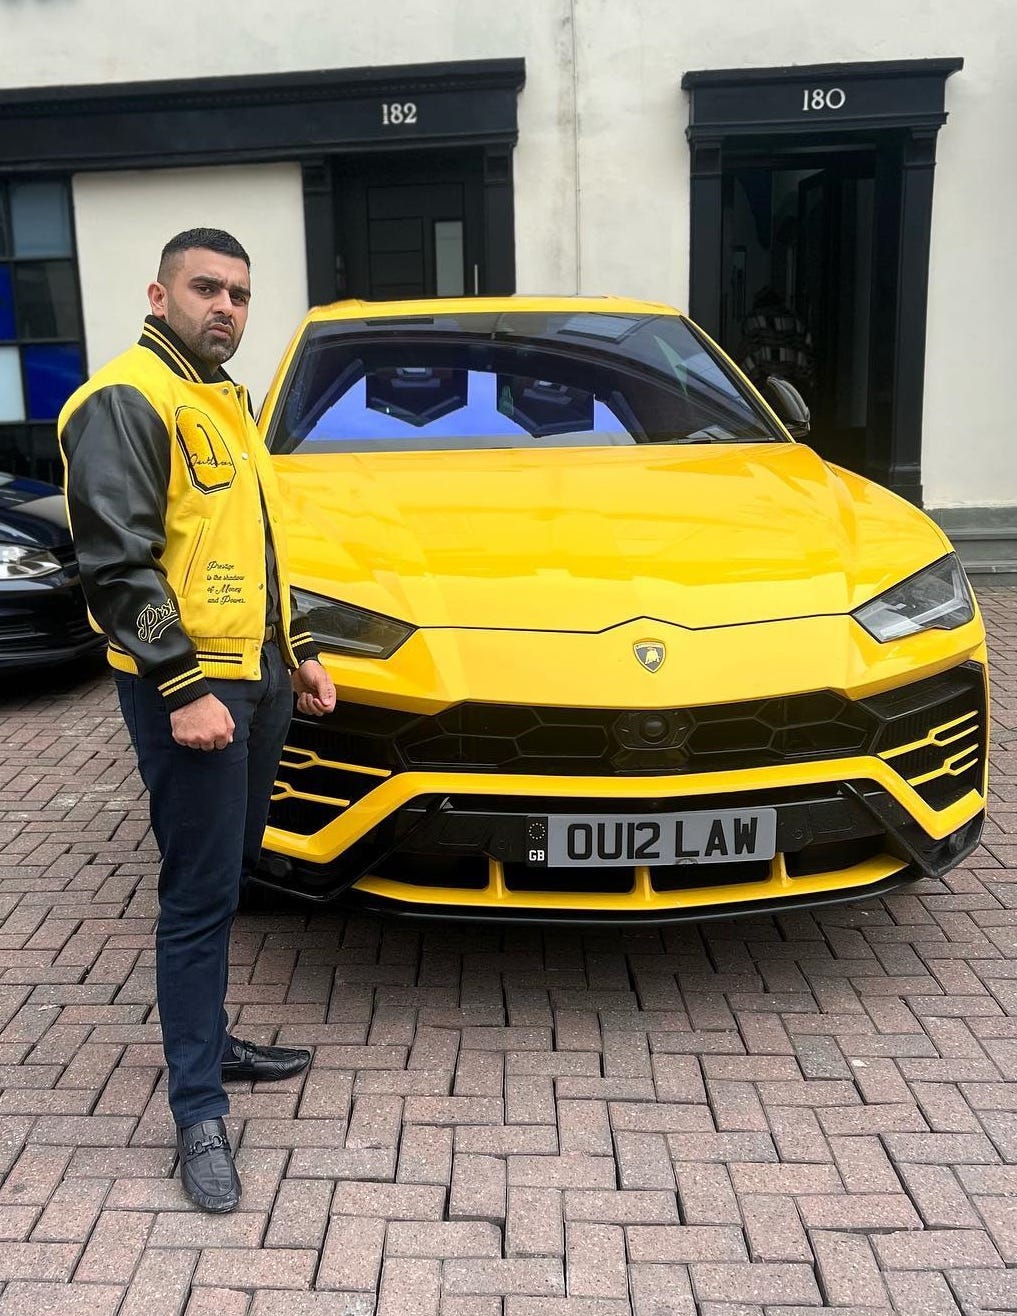 Yakoob used to own a fleet of supercars, including a Rolls-Royce and a Lamborghini, but he says he has “grown out of them”